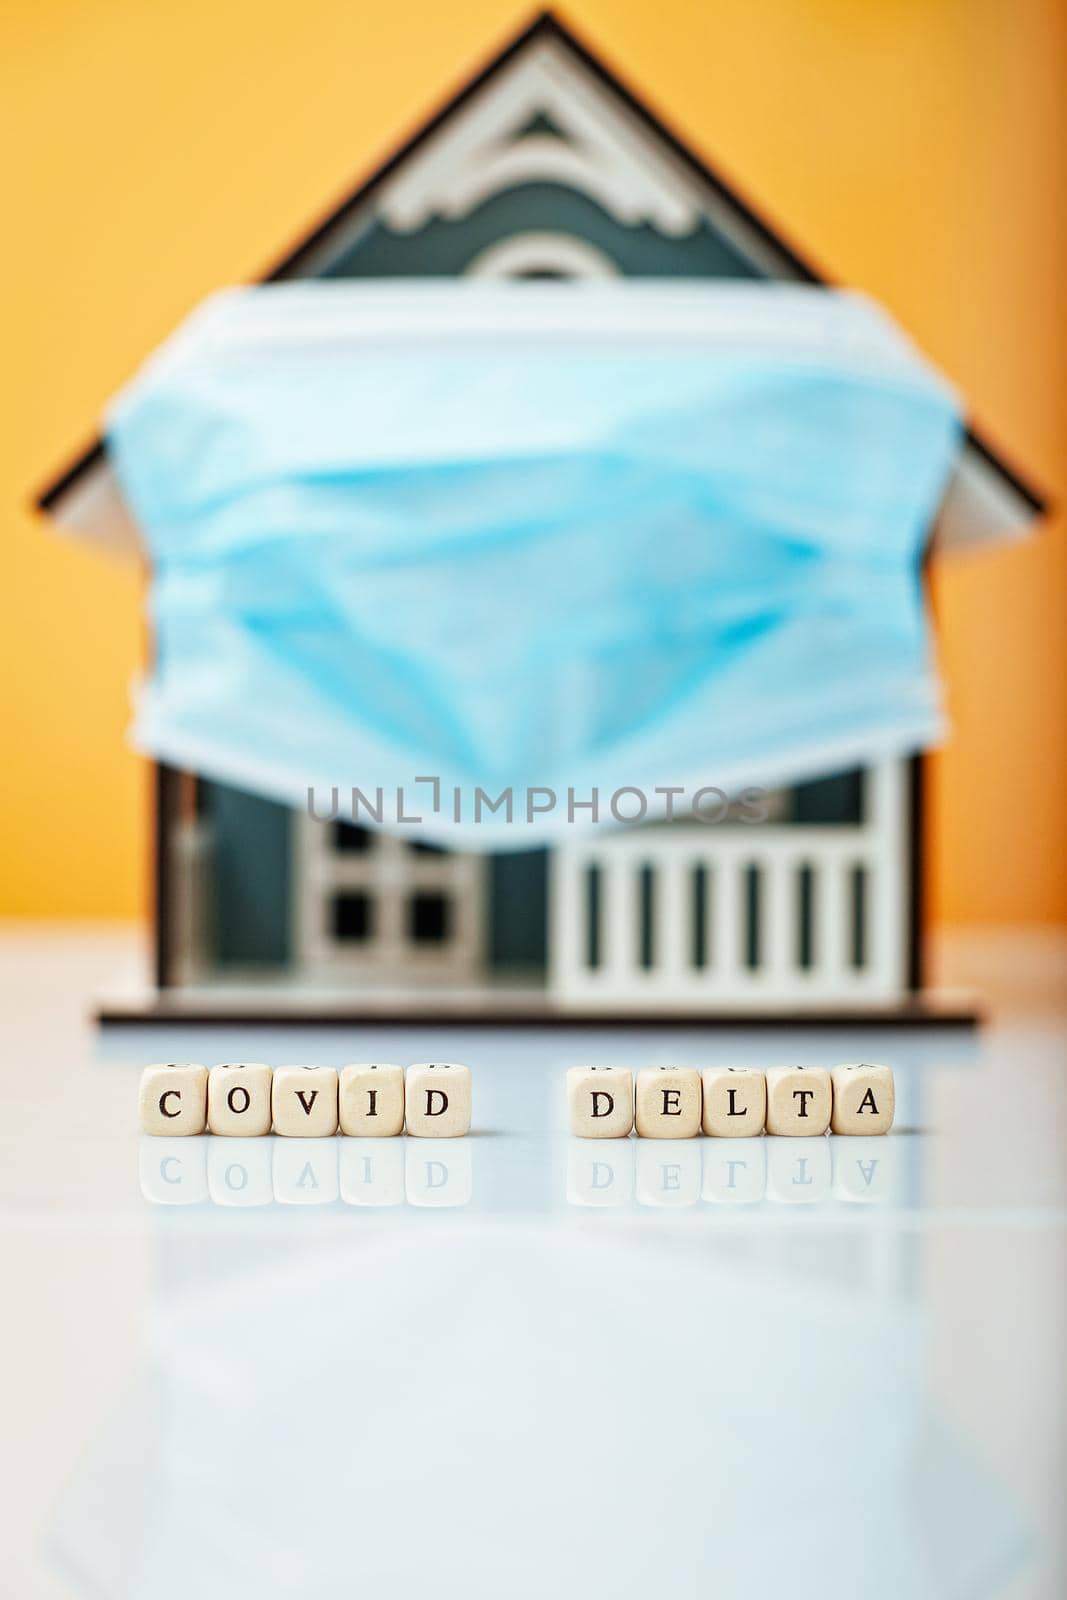 Inscription Covid Delta. Model house in a protective medical mask on a yellow background.